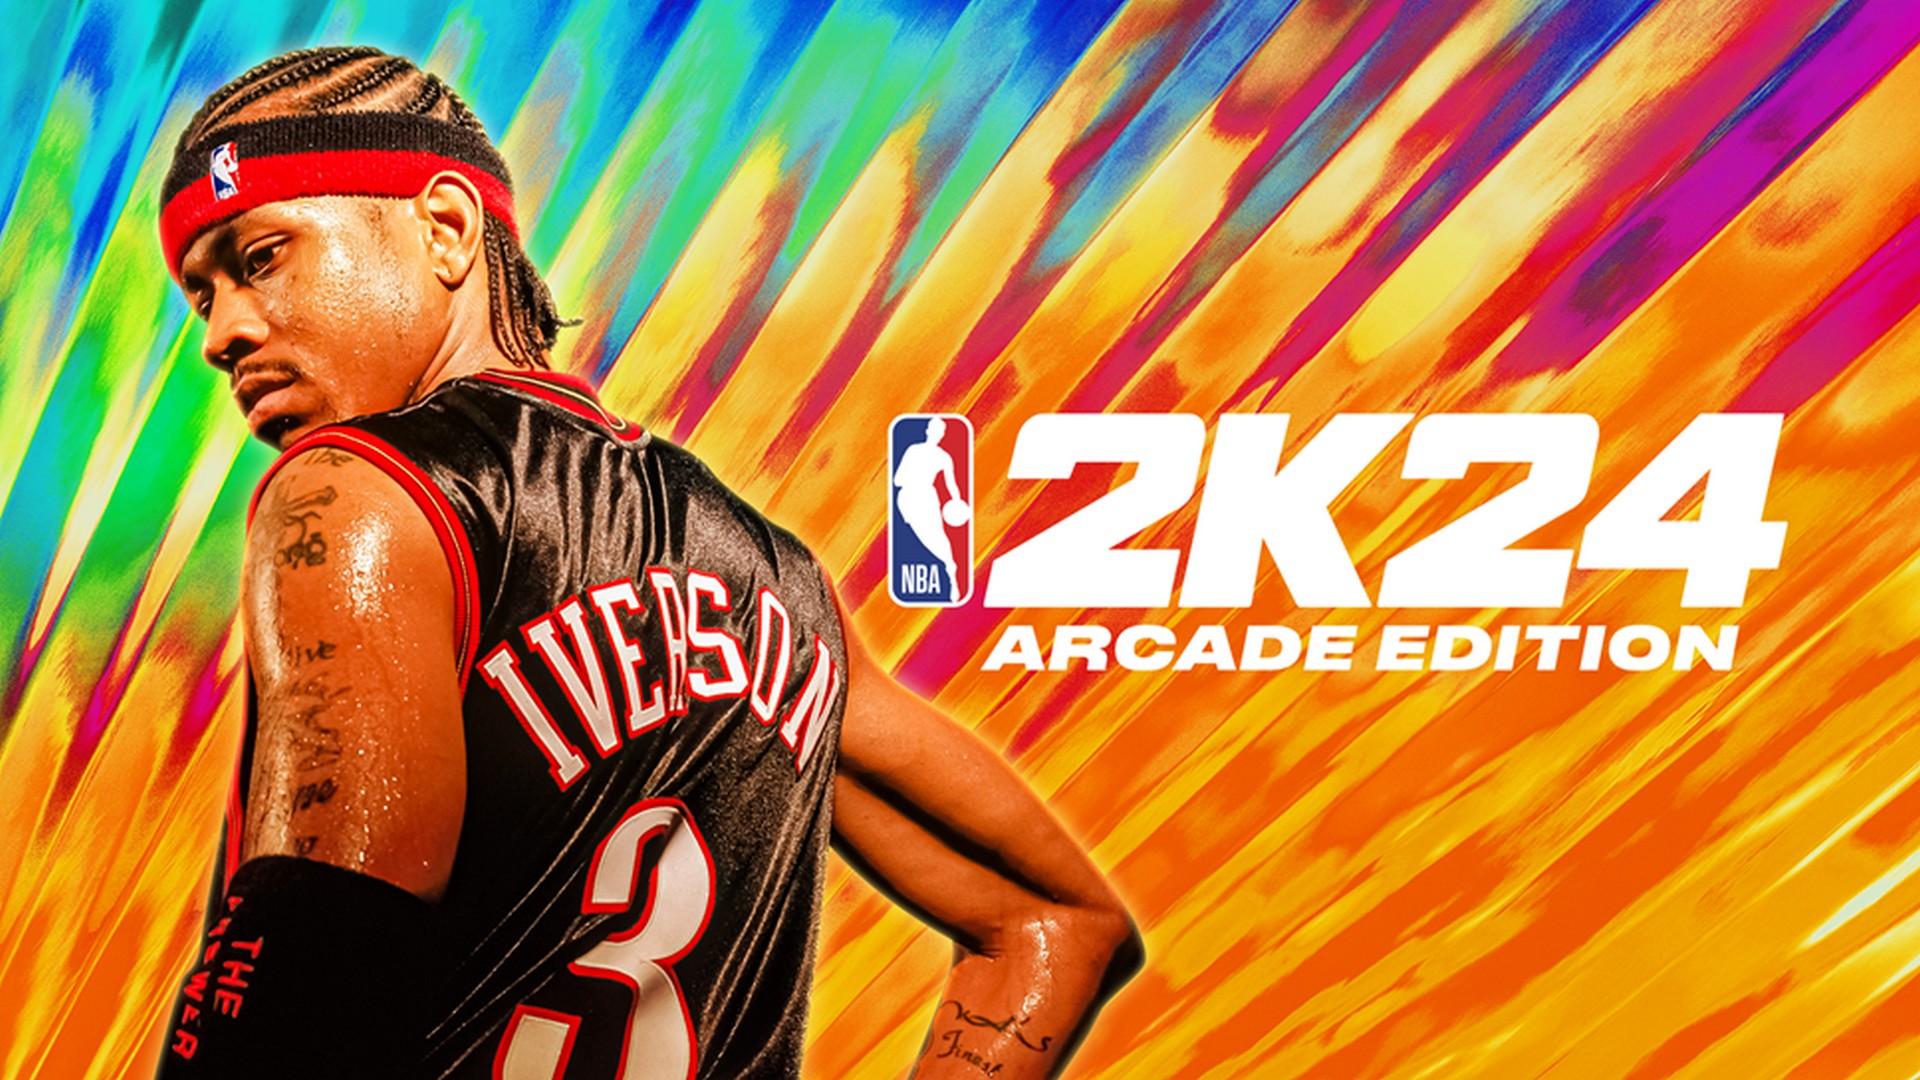 NBA 2K24 Arcade Edition Now Available Exclusively On Apple Arcade